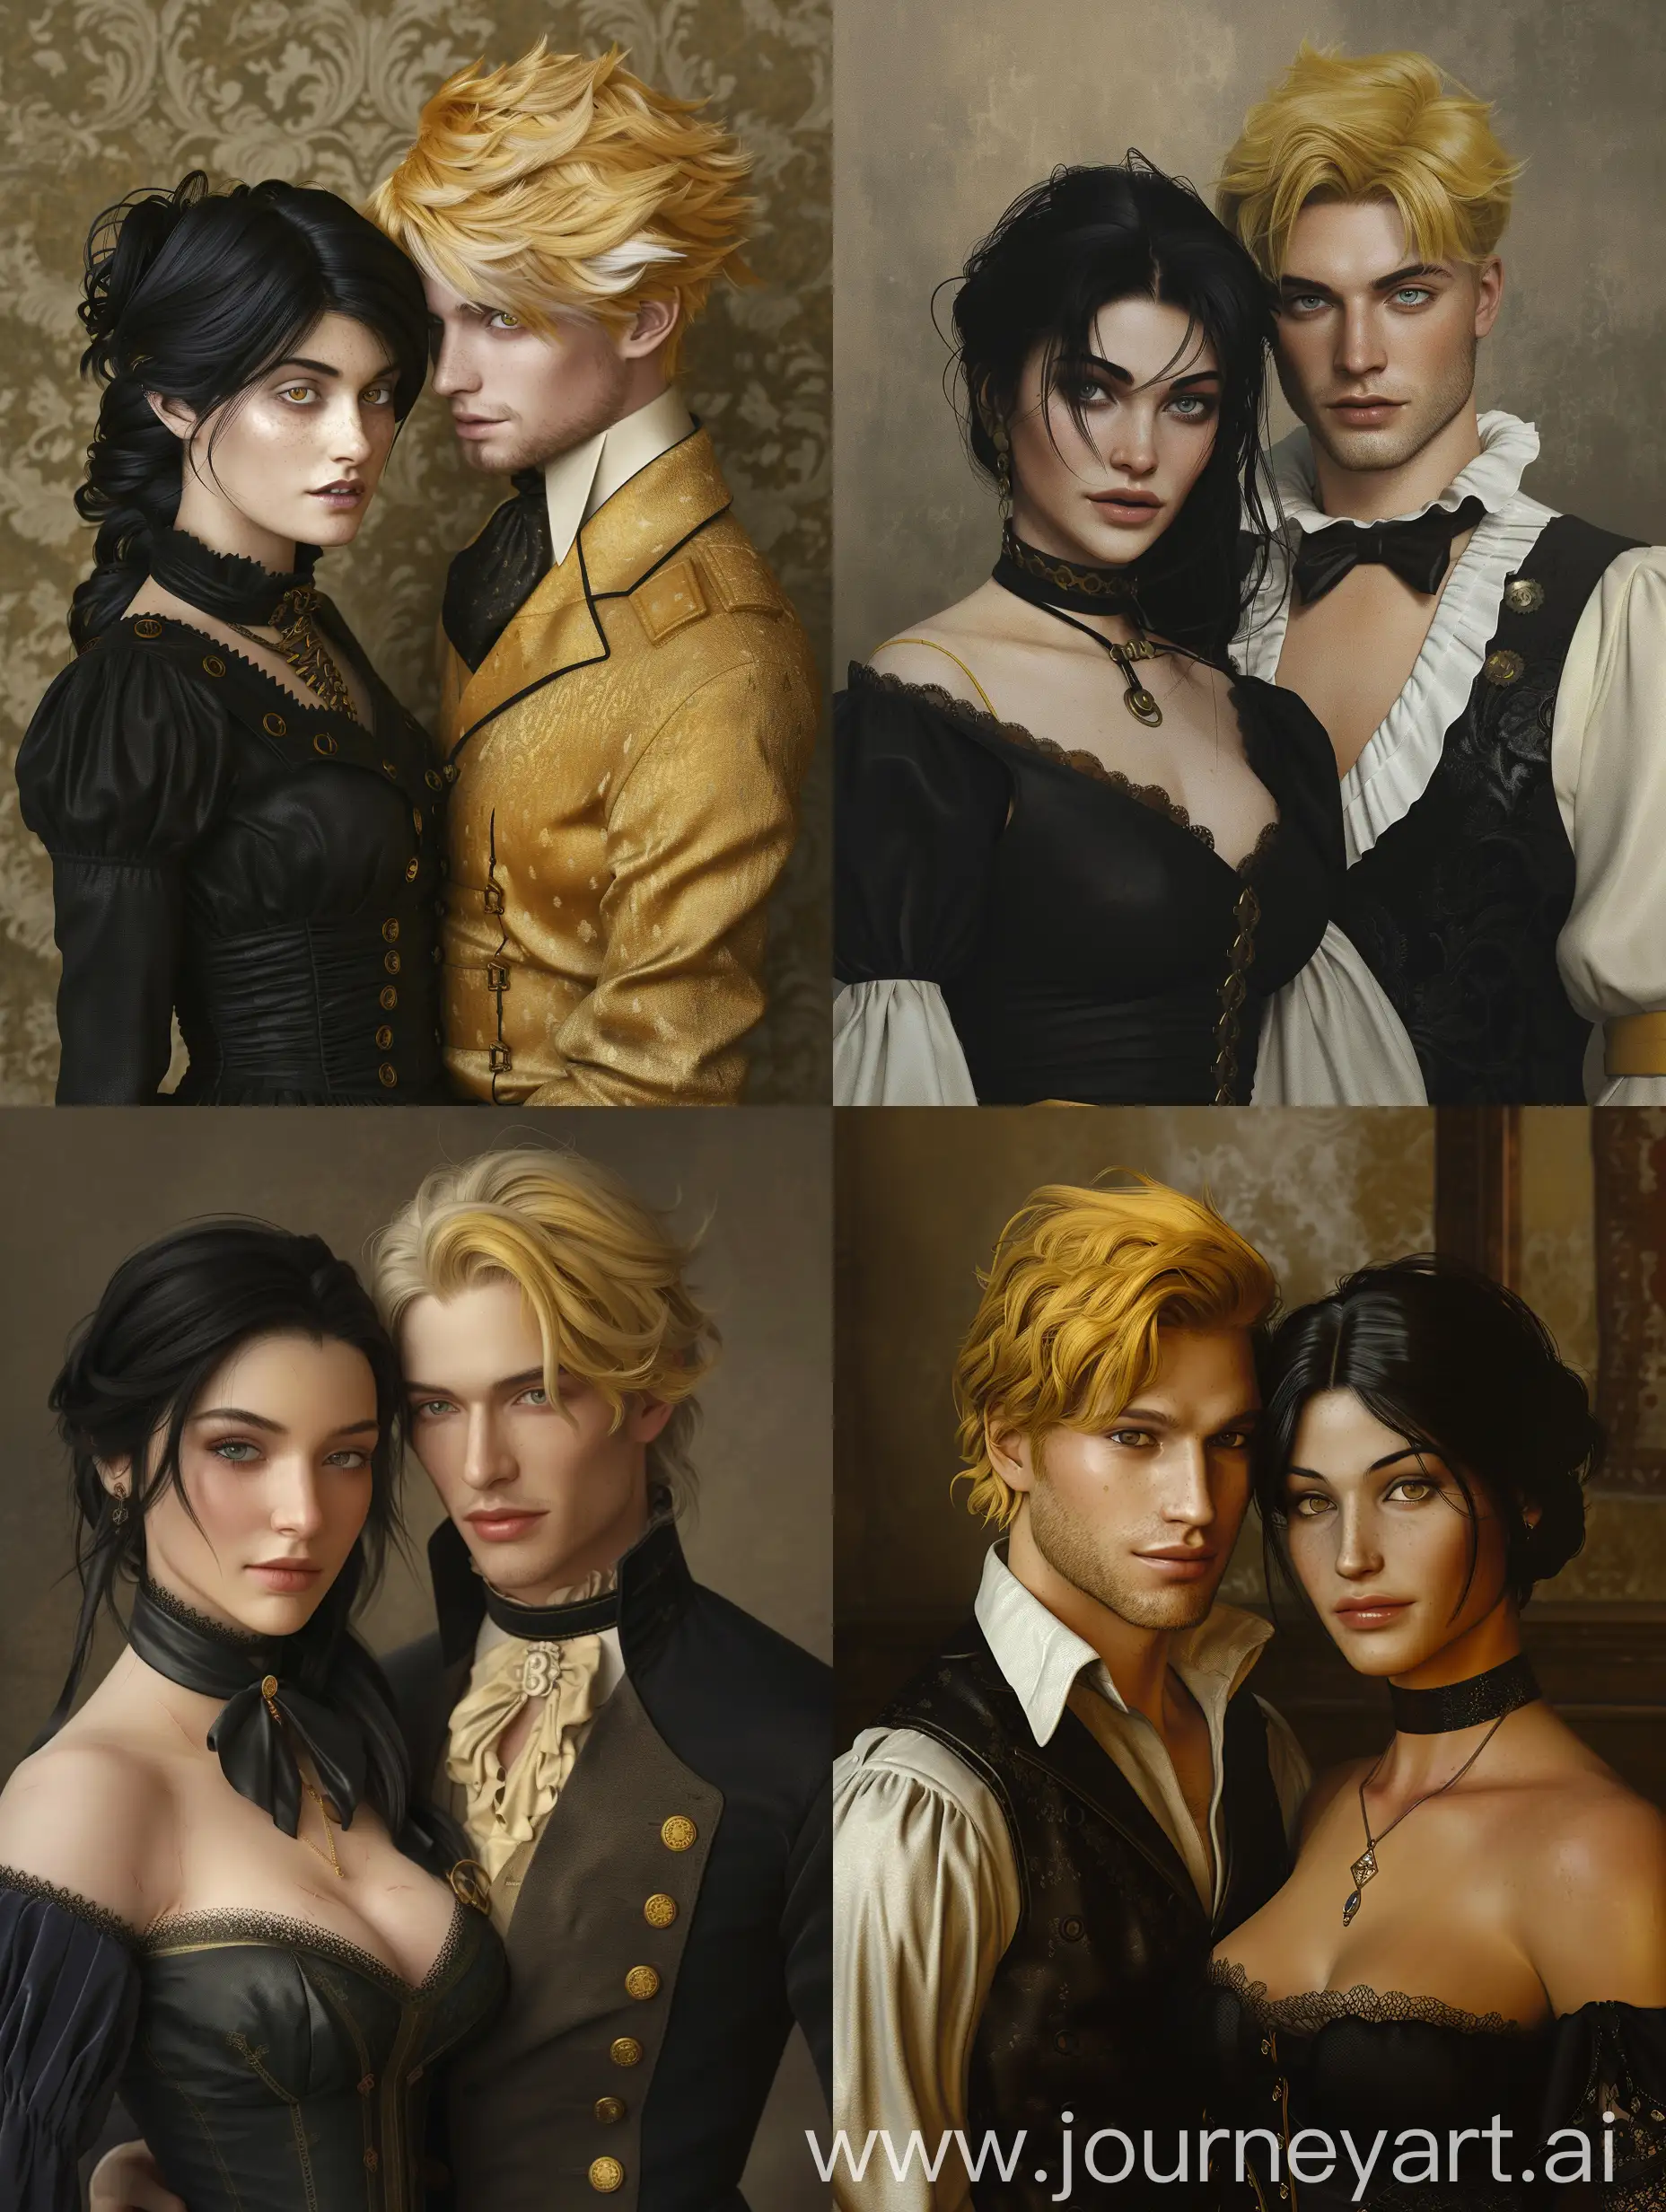 Charming-Steampunk-Couple-Portrait-Matilda-and-James-in-Detailed-3D-Photorealistic-Art